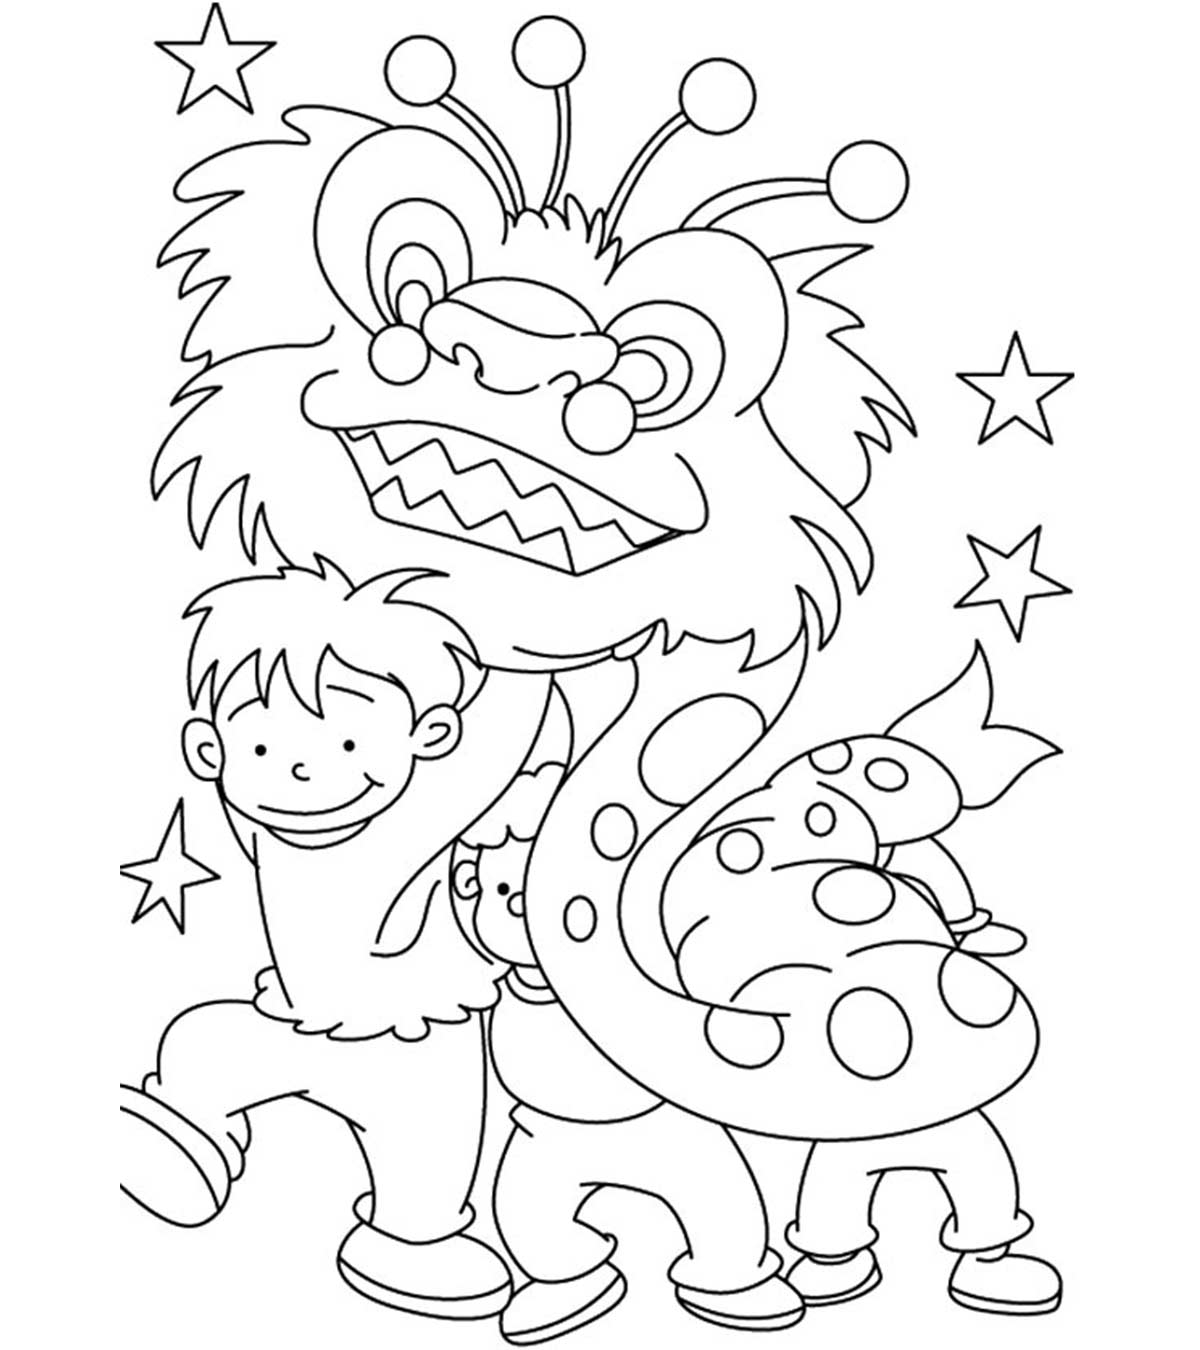 664 Unicorn Printable Chinese New Year Coloring Pages for Kids